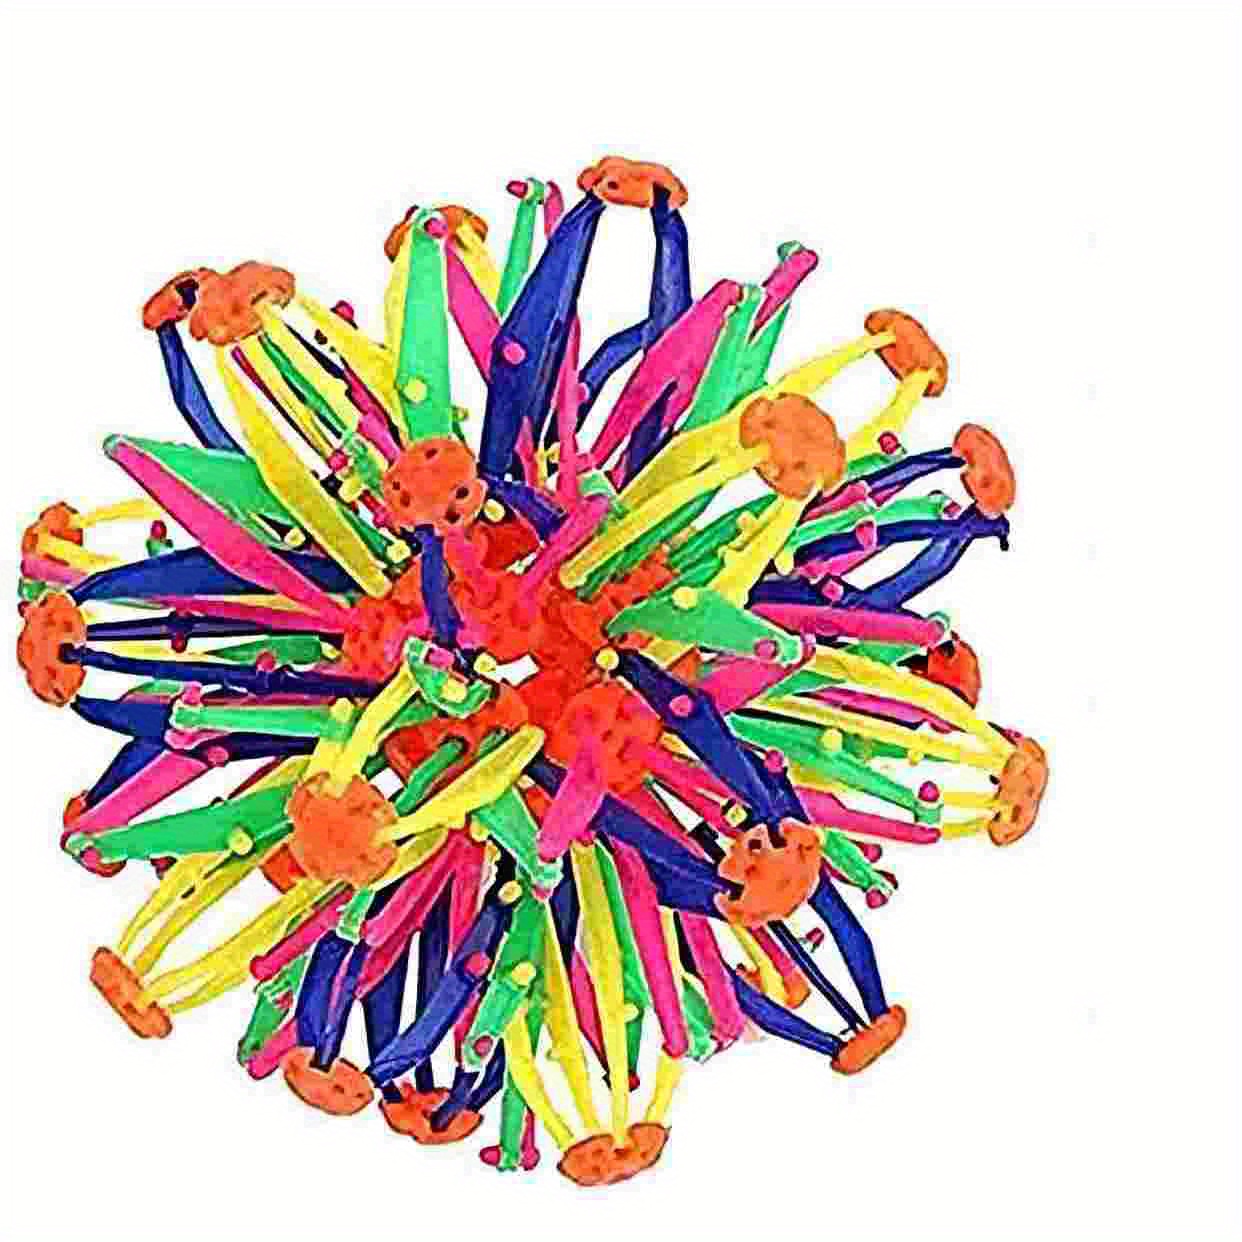 Expandable Ball Fidget Toy, Great Expanding Sphere Toy for Kids, Hand Catch